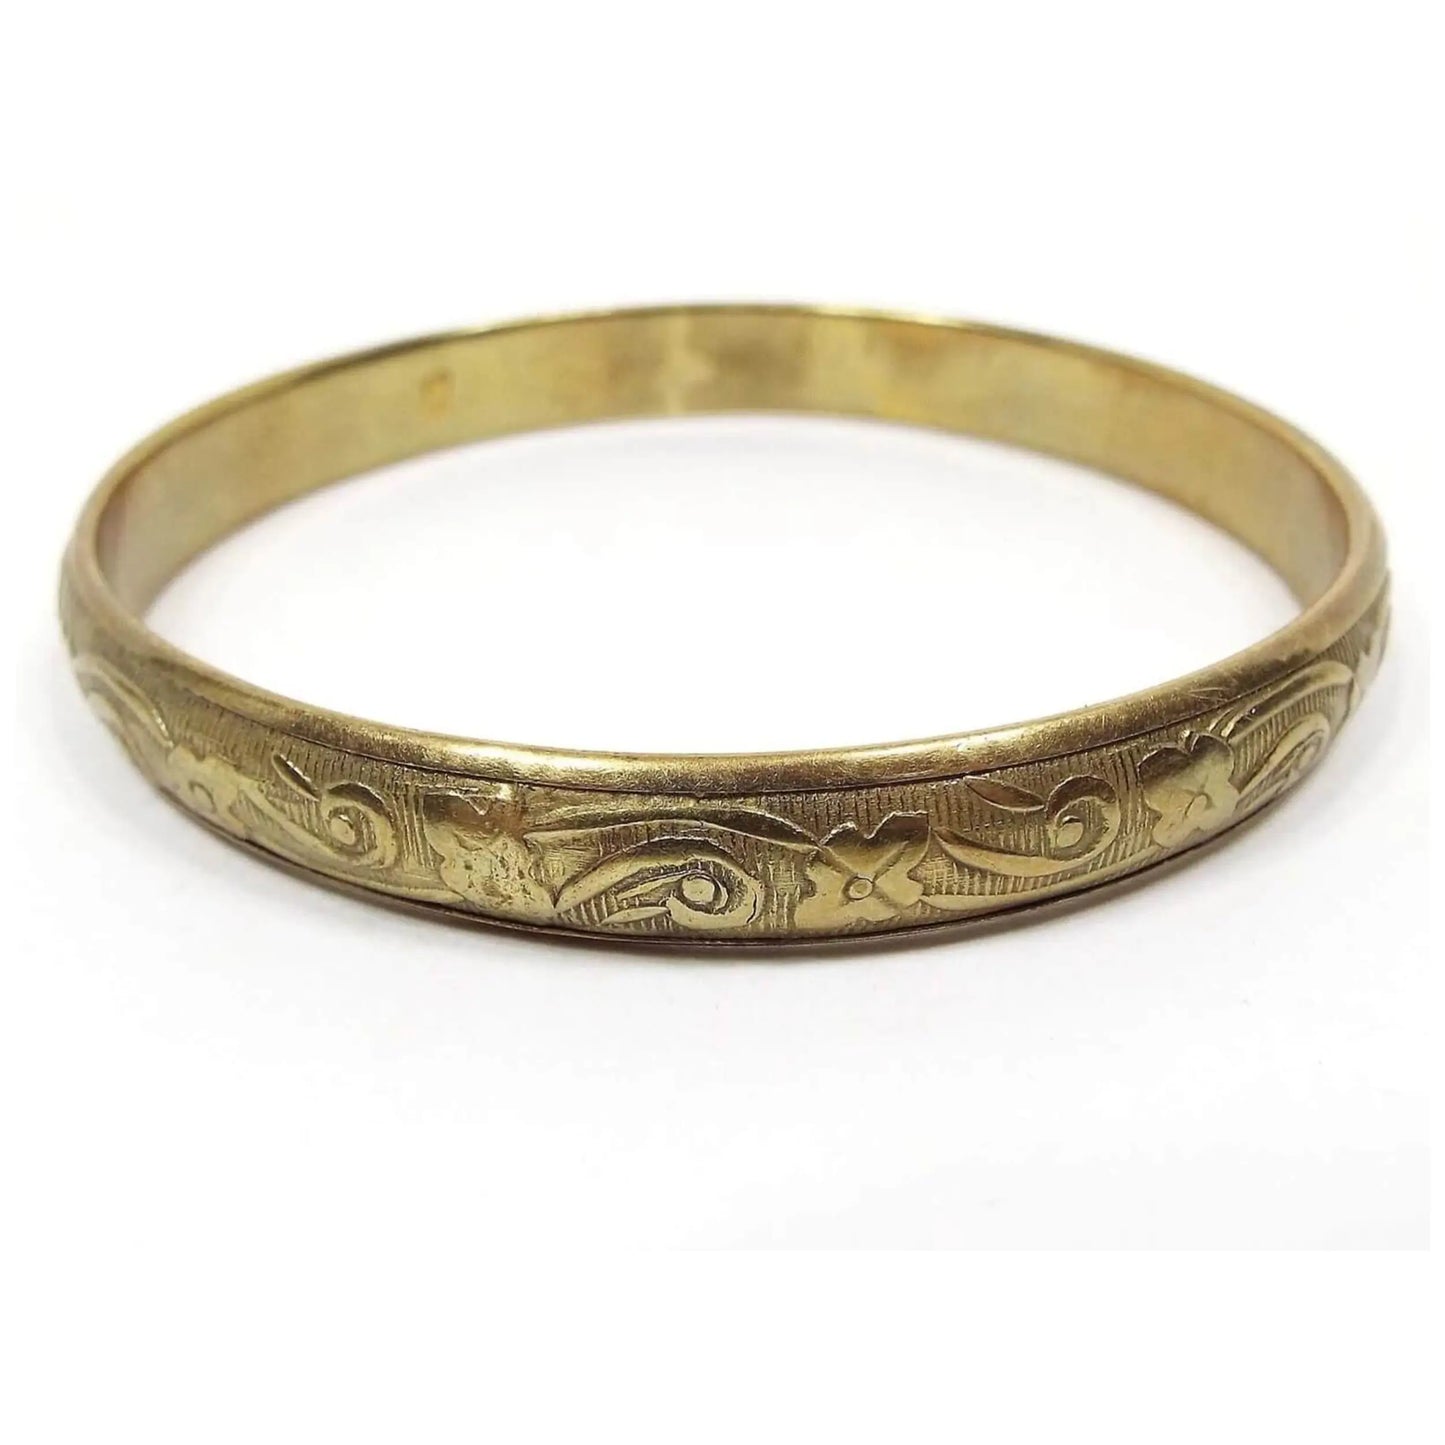 Angled side and top view of the retro vintage floral bangle bracelet. It's made of brass and is a darker gold tone in color. The bangle is round with a raised pattern of flowers against a background of lines.